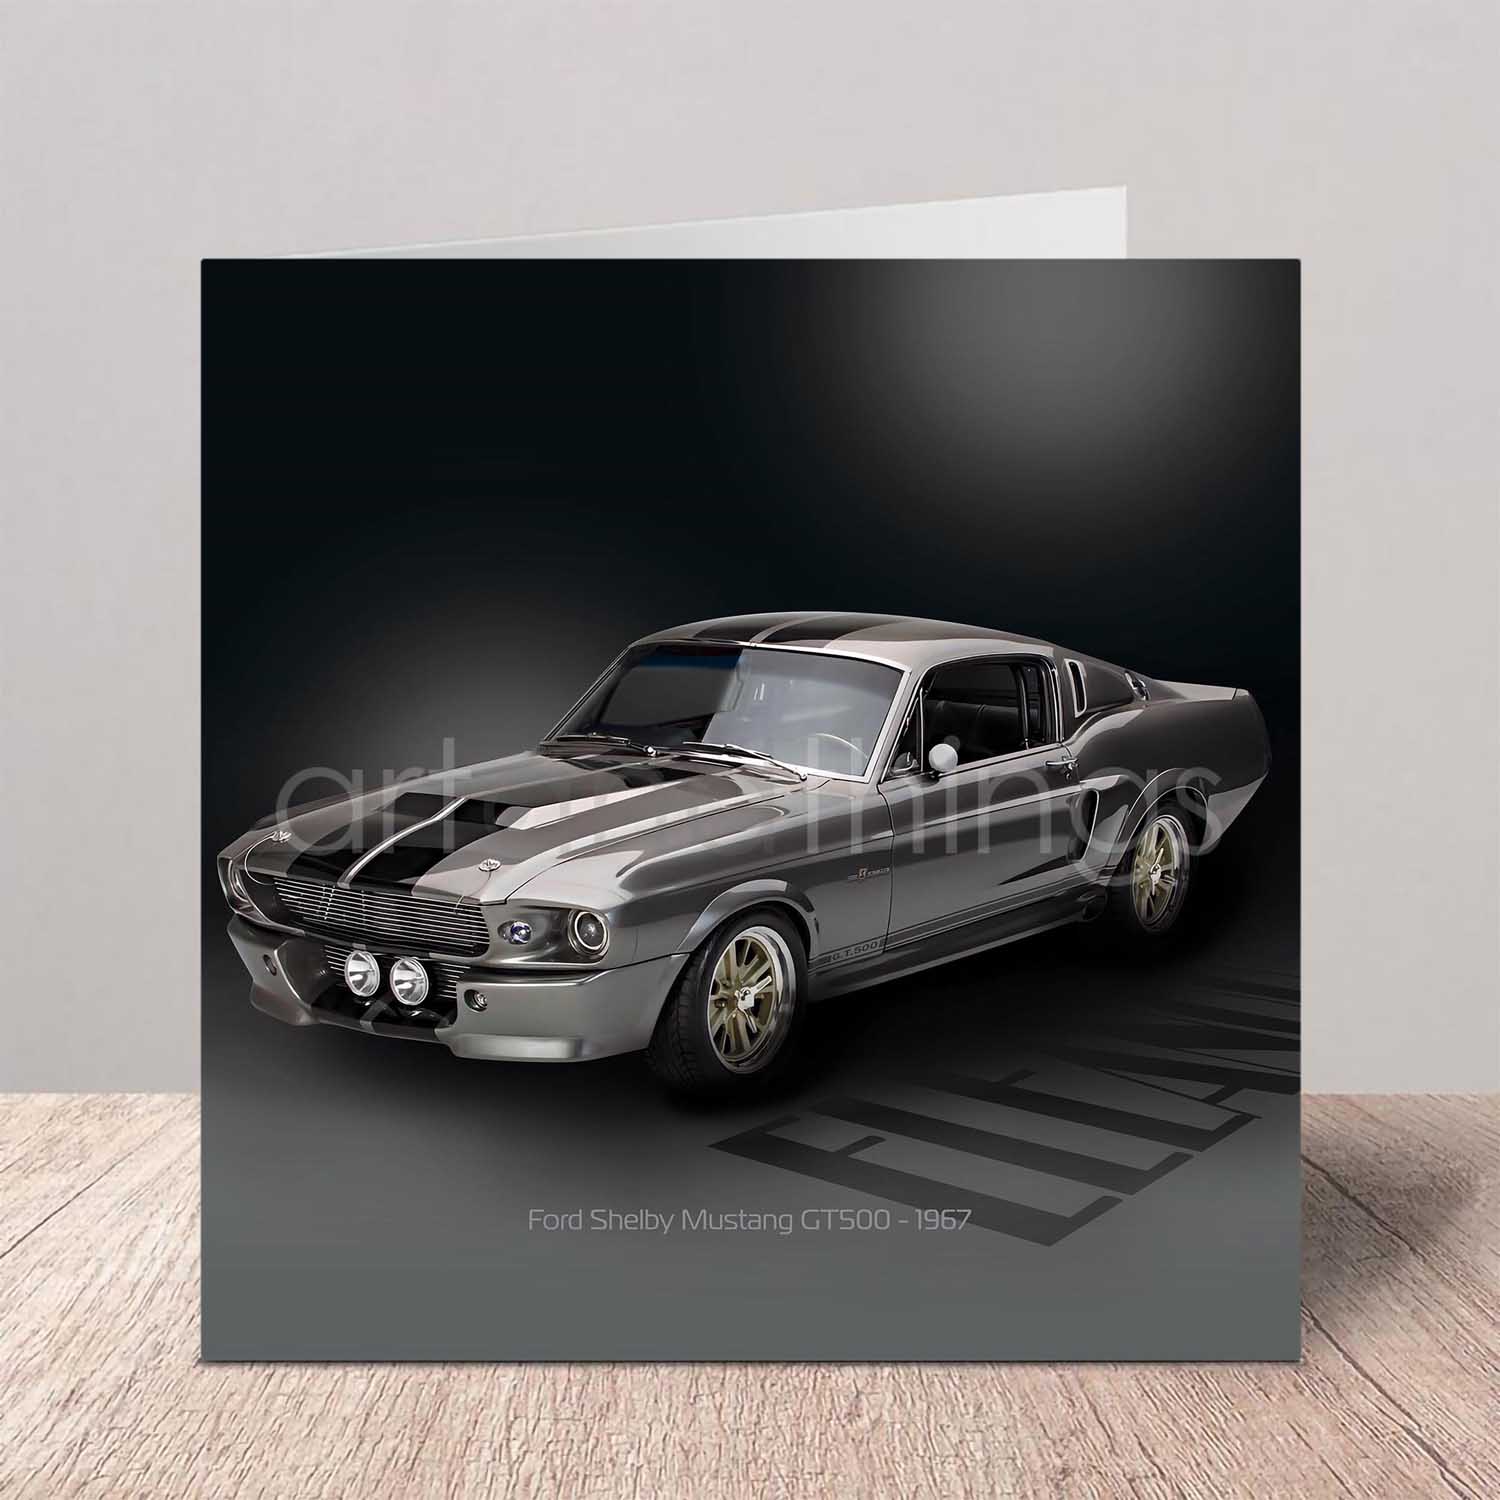 Shelby Mustang GT500 Greeting Card